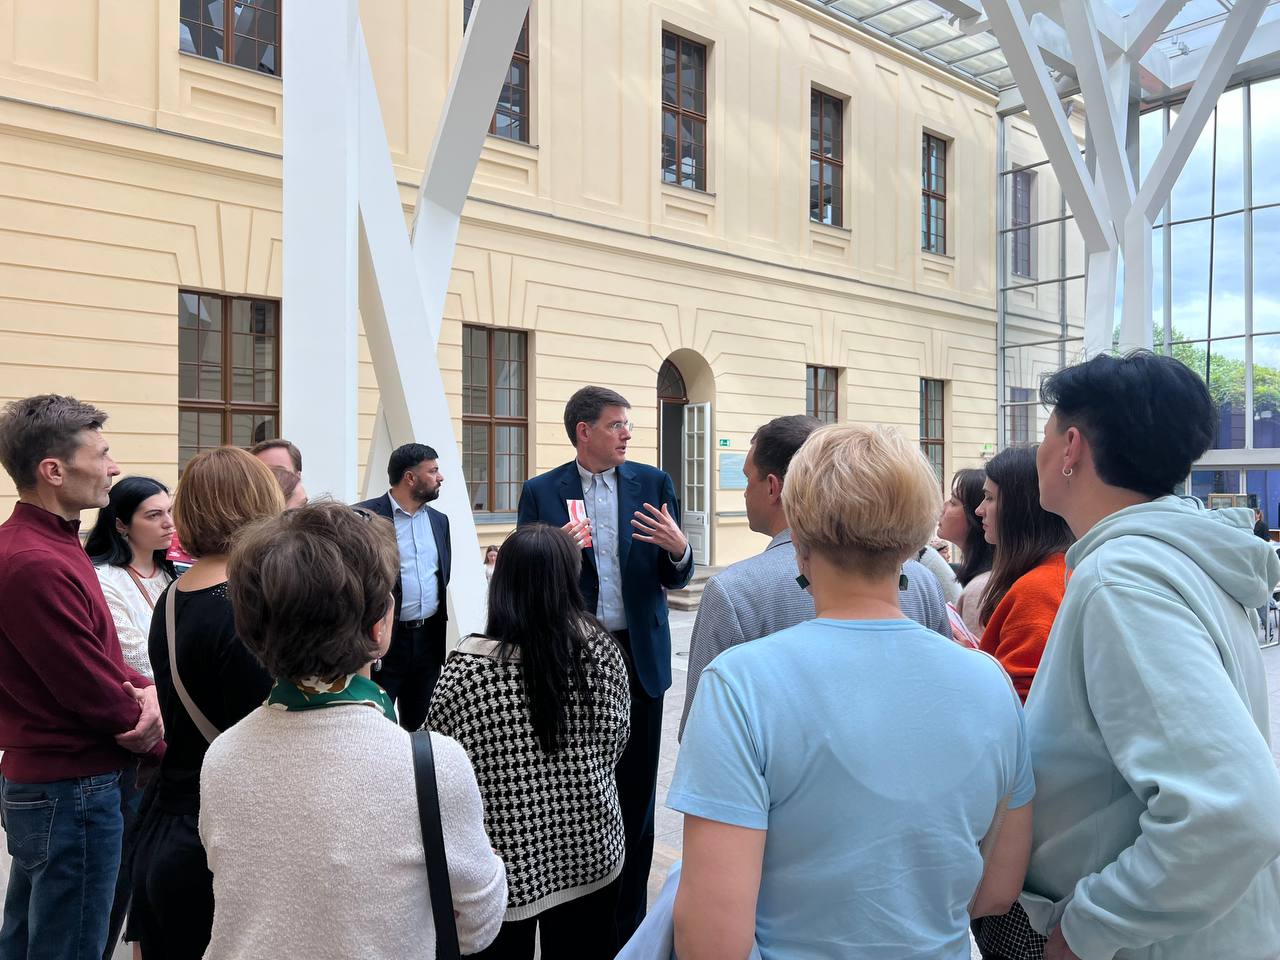 A group of people attentively listens to a speaker, standing in an covered courtyard with a modern, geometric canopy structure and the facade of a classic building in the background.